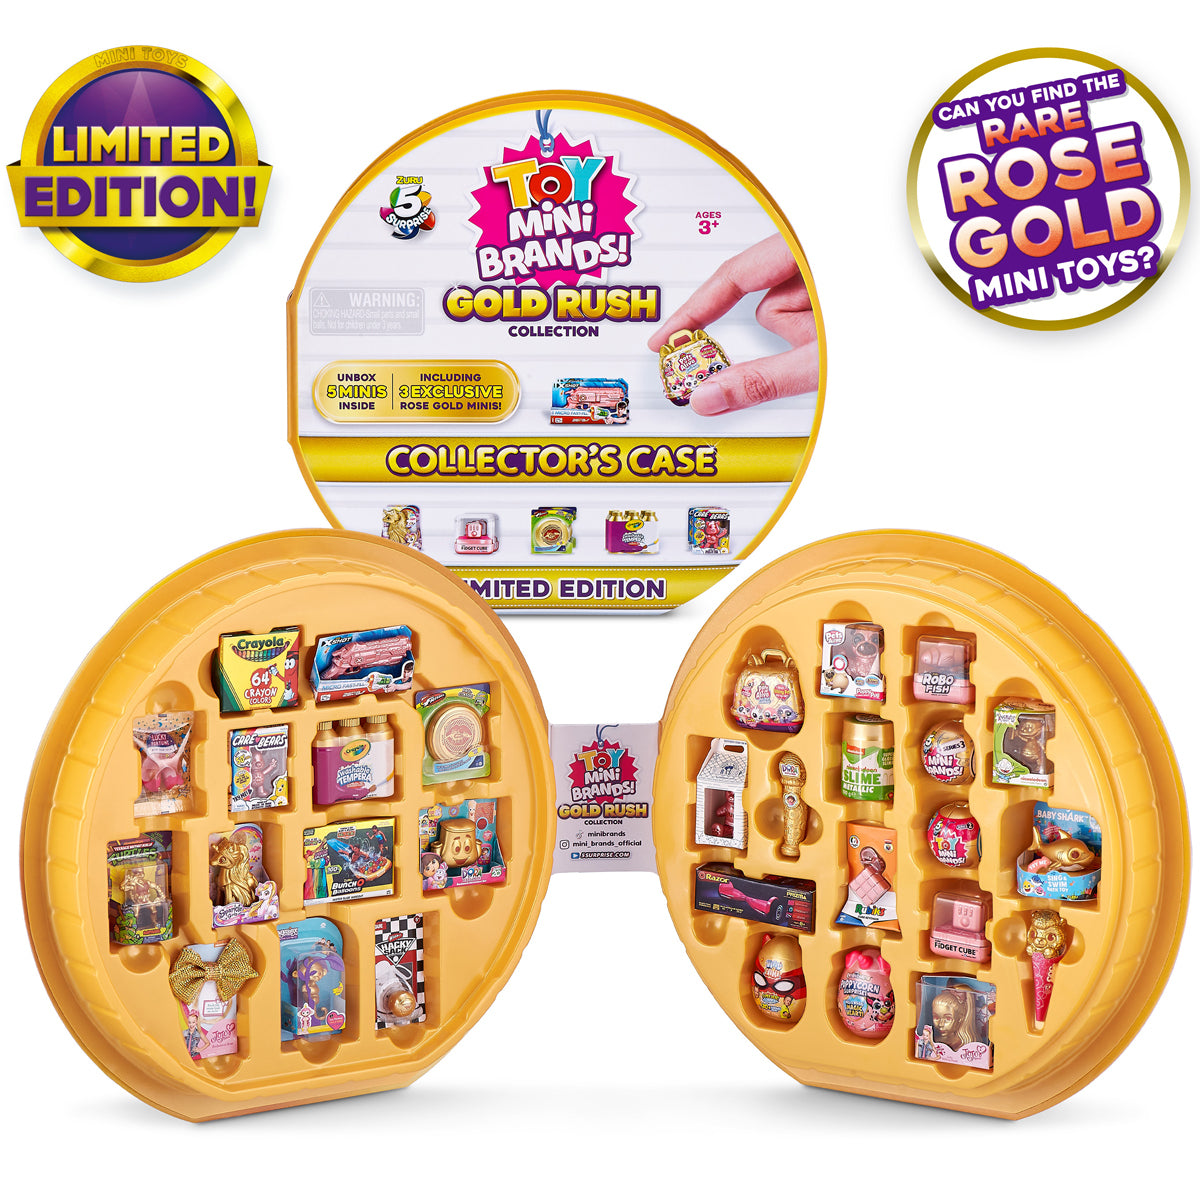 5 Surprise Toy Mini Brands - Gold Rush Collector's Case with 5 Surprises